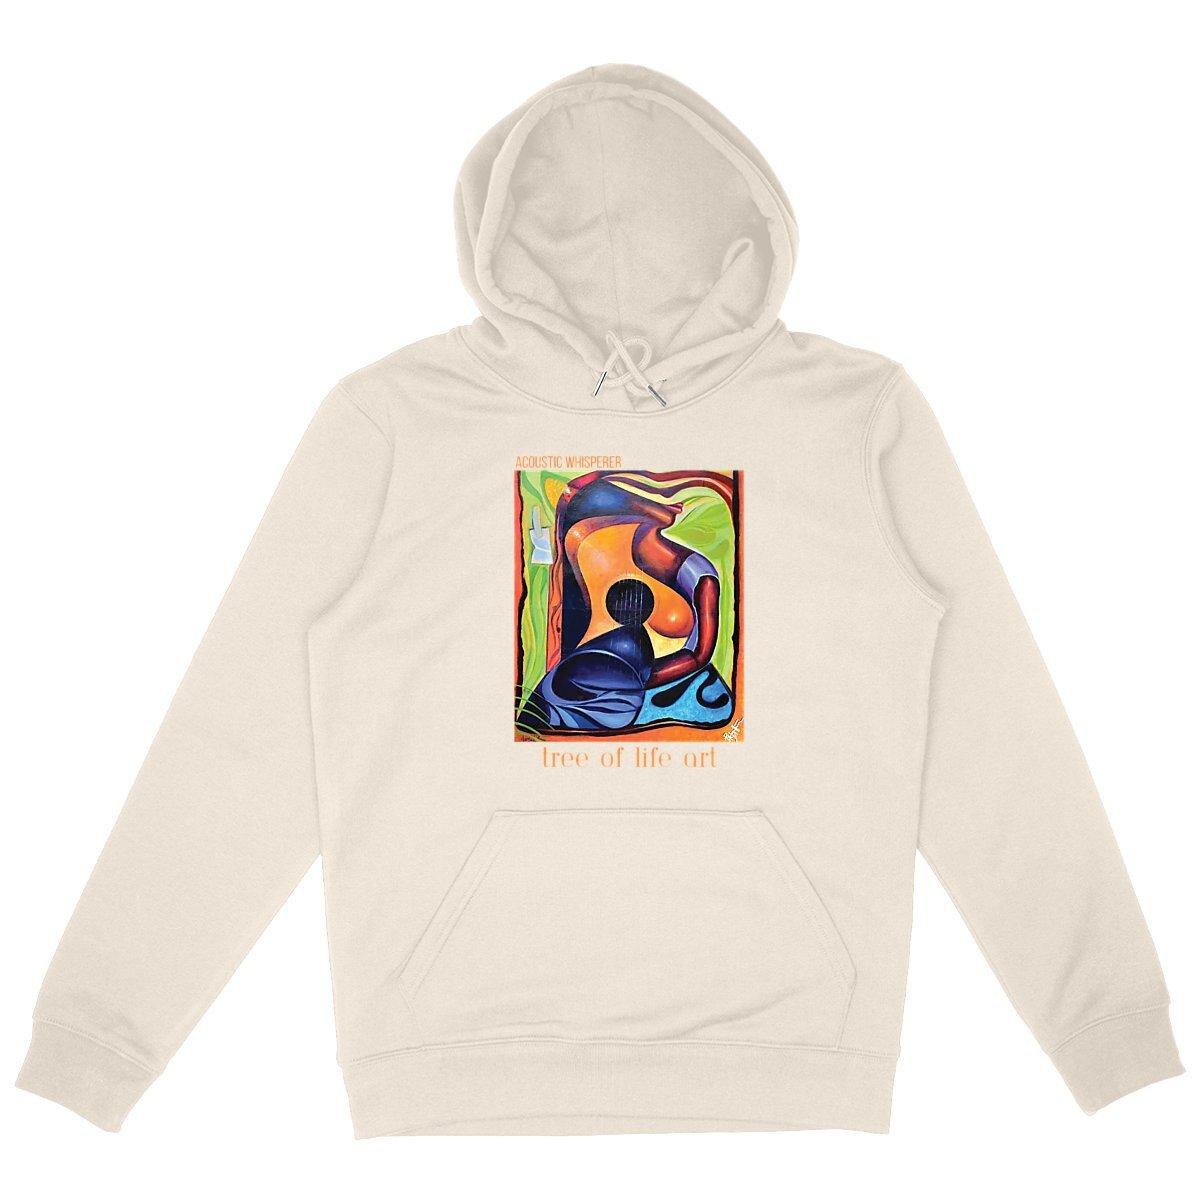 Acoustic Whisperer premium unisex hoodie, heavyweight medium fit, offered by Tree of Life Art, perfect for versatile, durable wear.